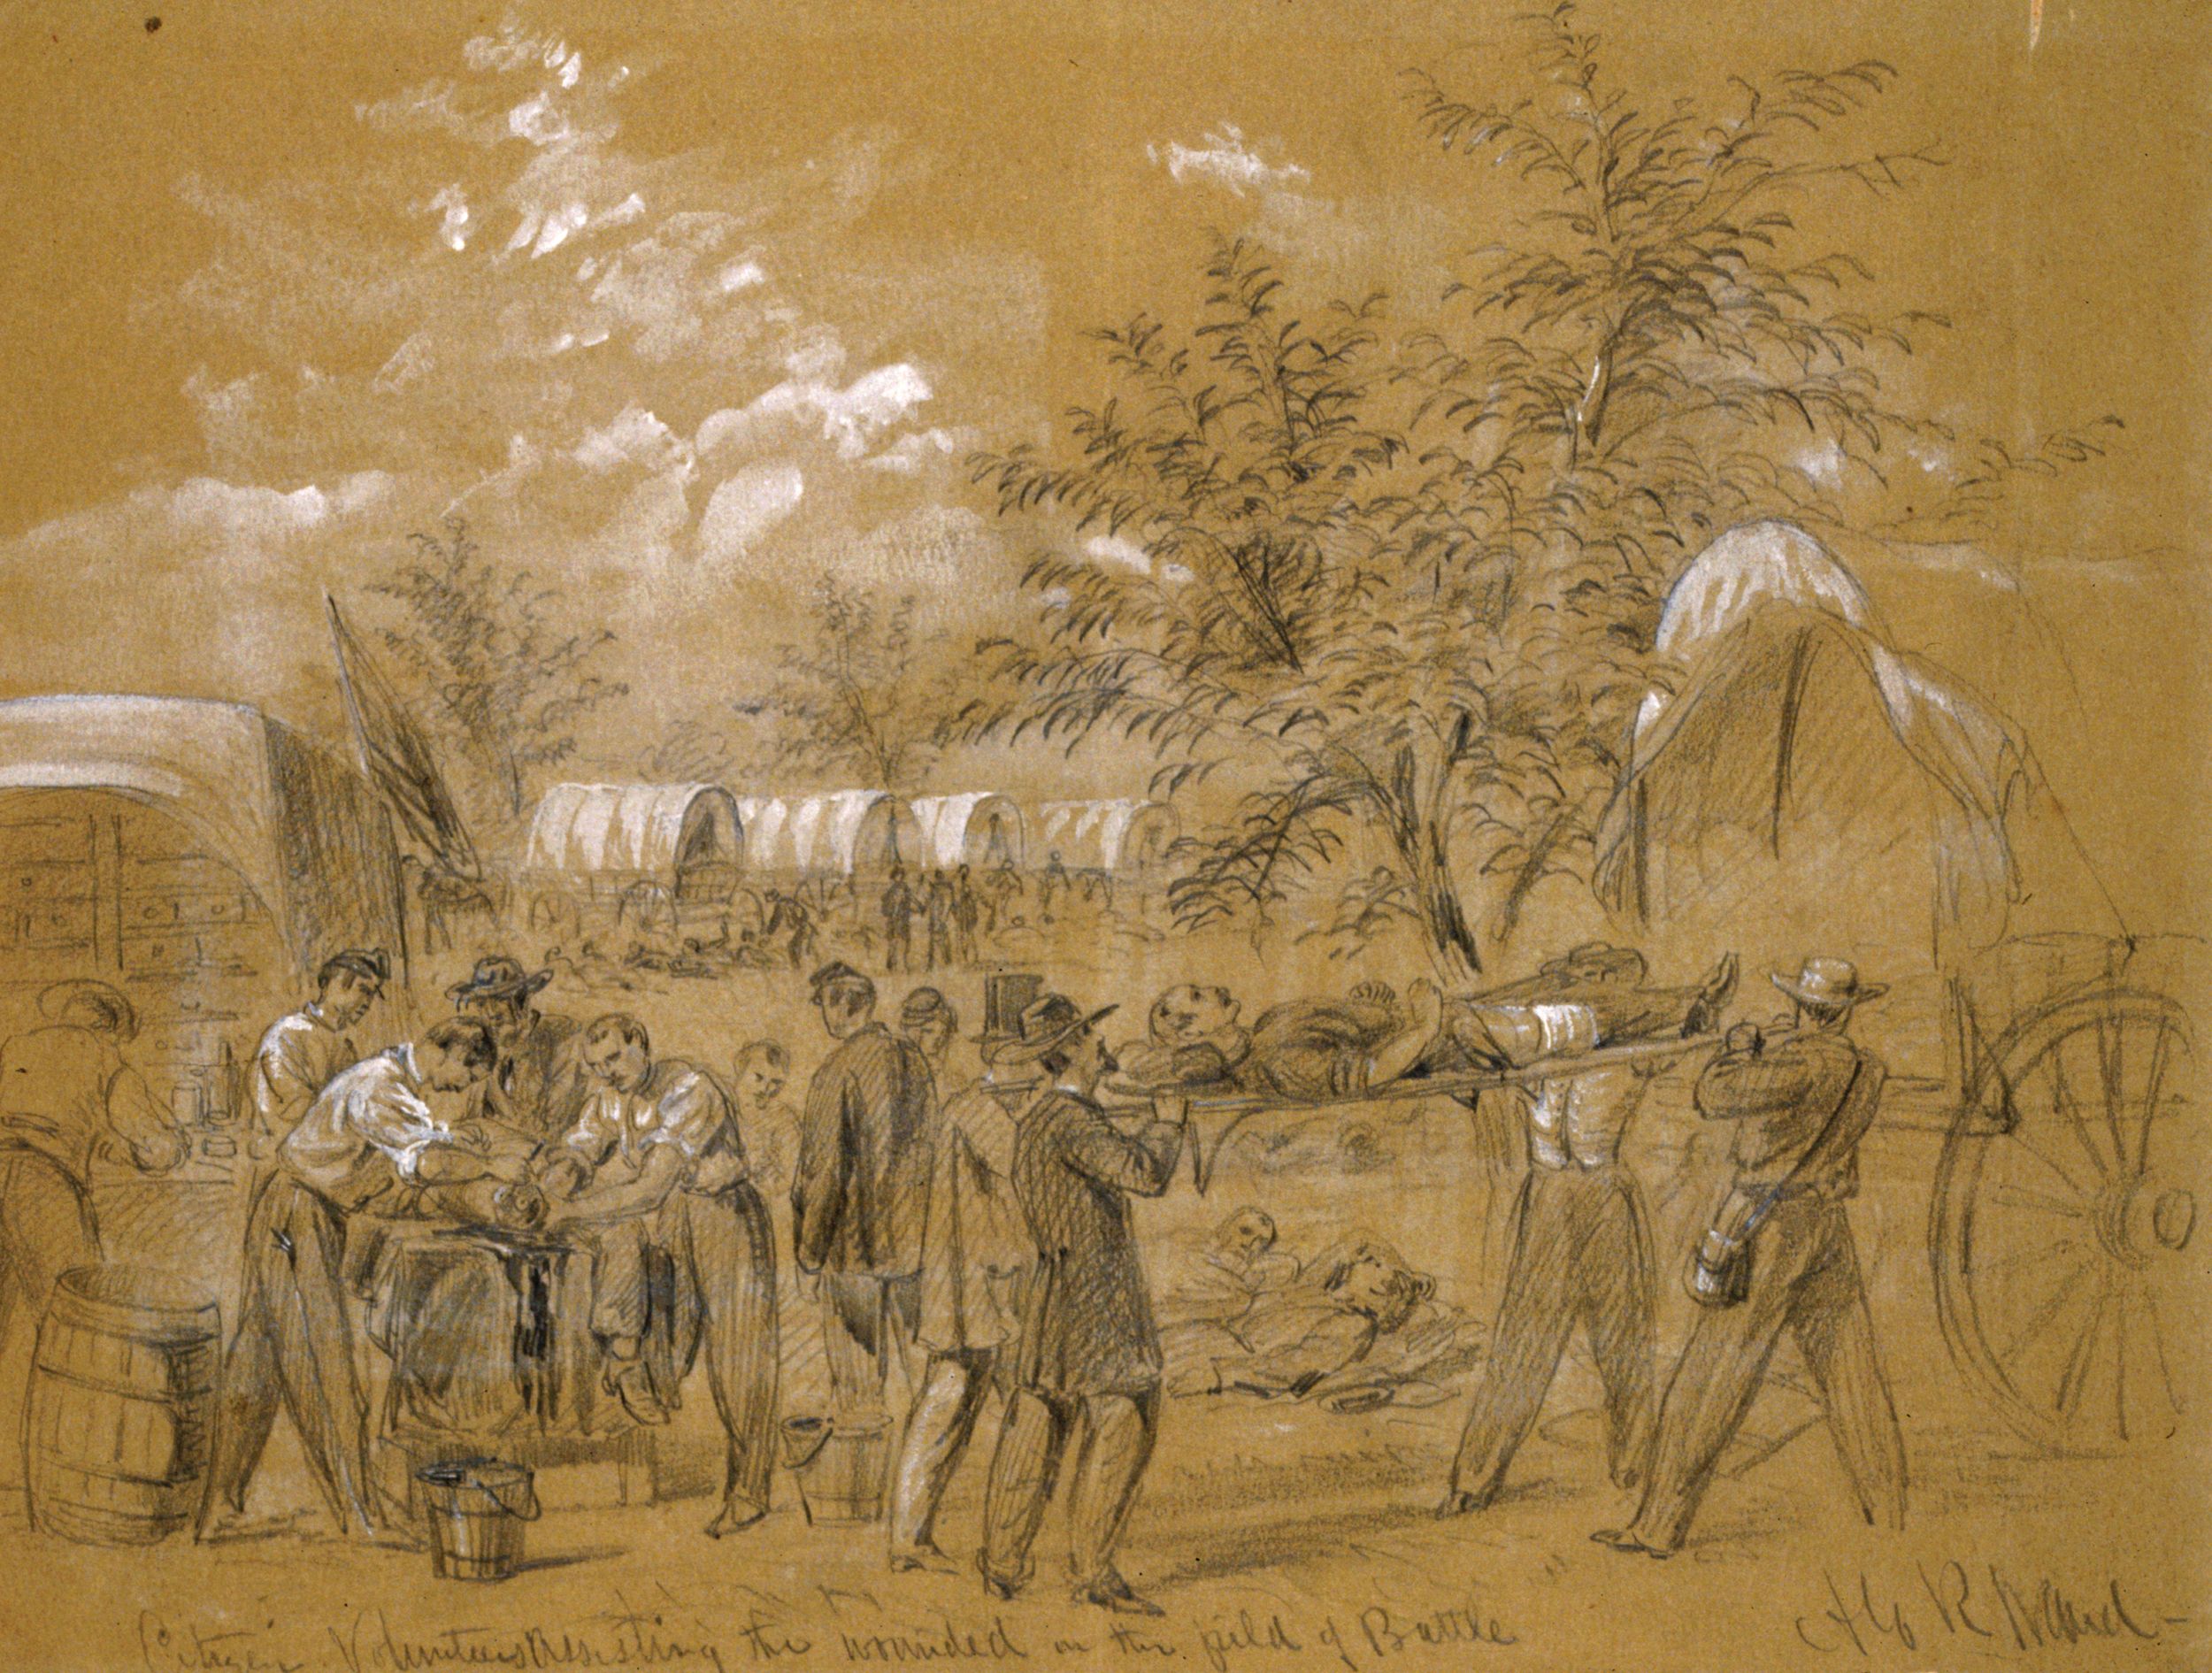 Civilian volunteers assist in moving the wounded from ambulance wagons to a field hospital in this sketch by Harper’s Weekly artist Alfred Waud.